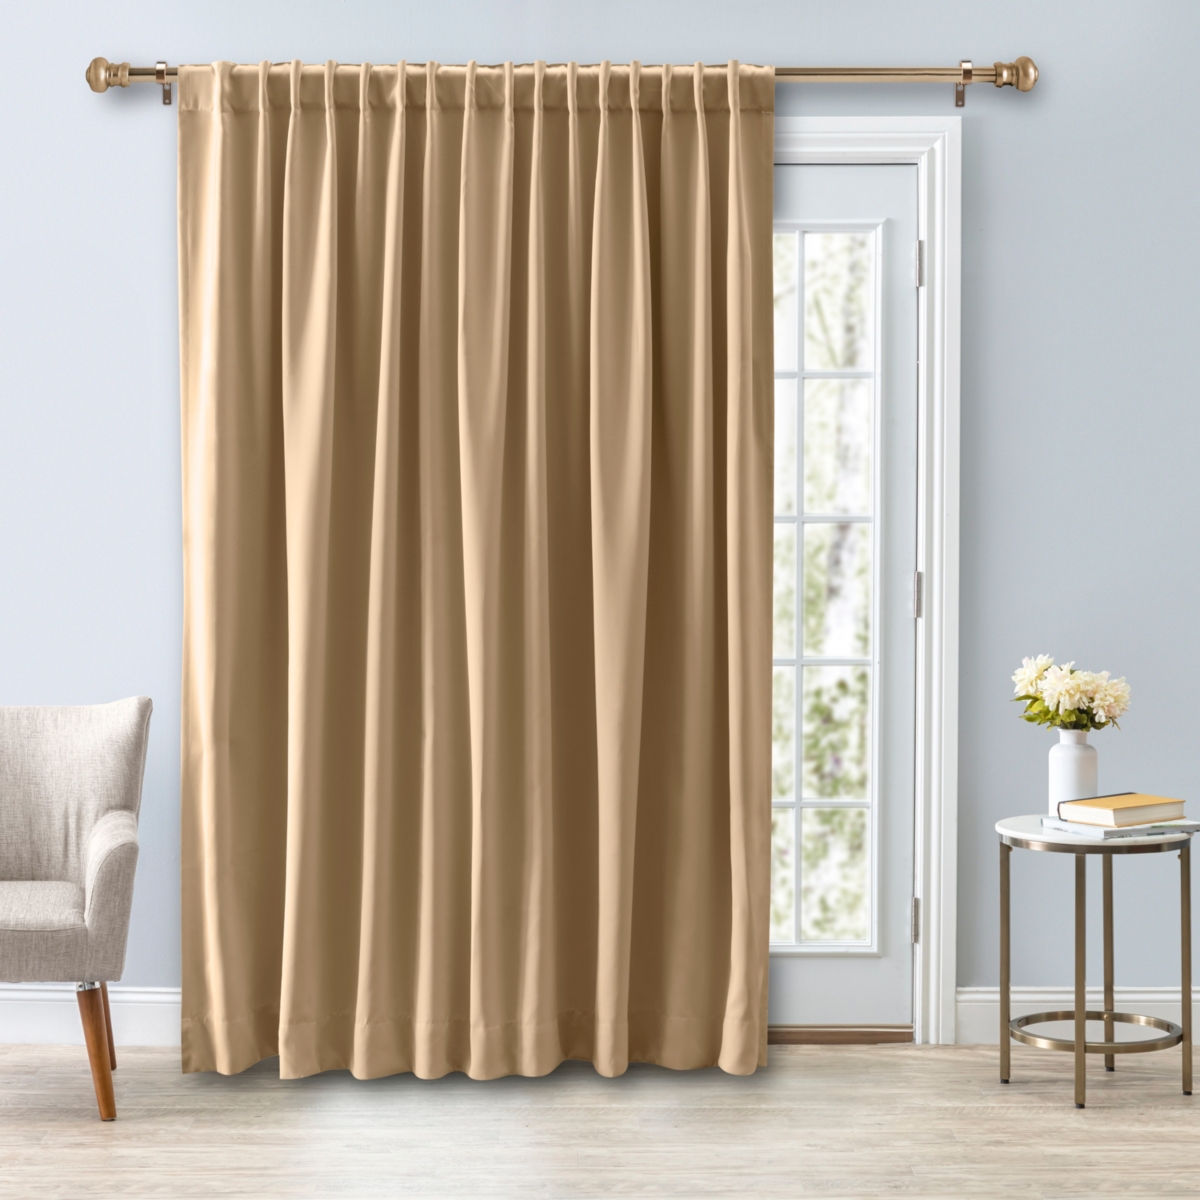 Ultimate Black-Out 2-Way Pocket Double-wide Curtain Panel 112"W x 84"L - Ivory